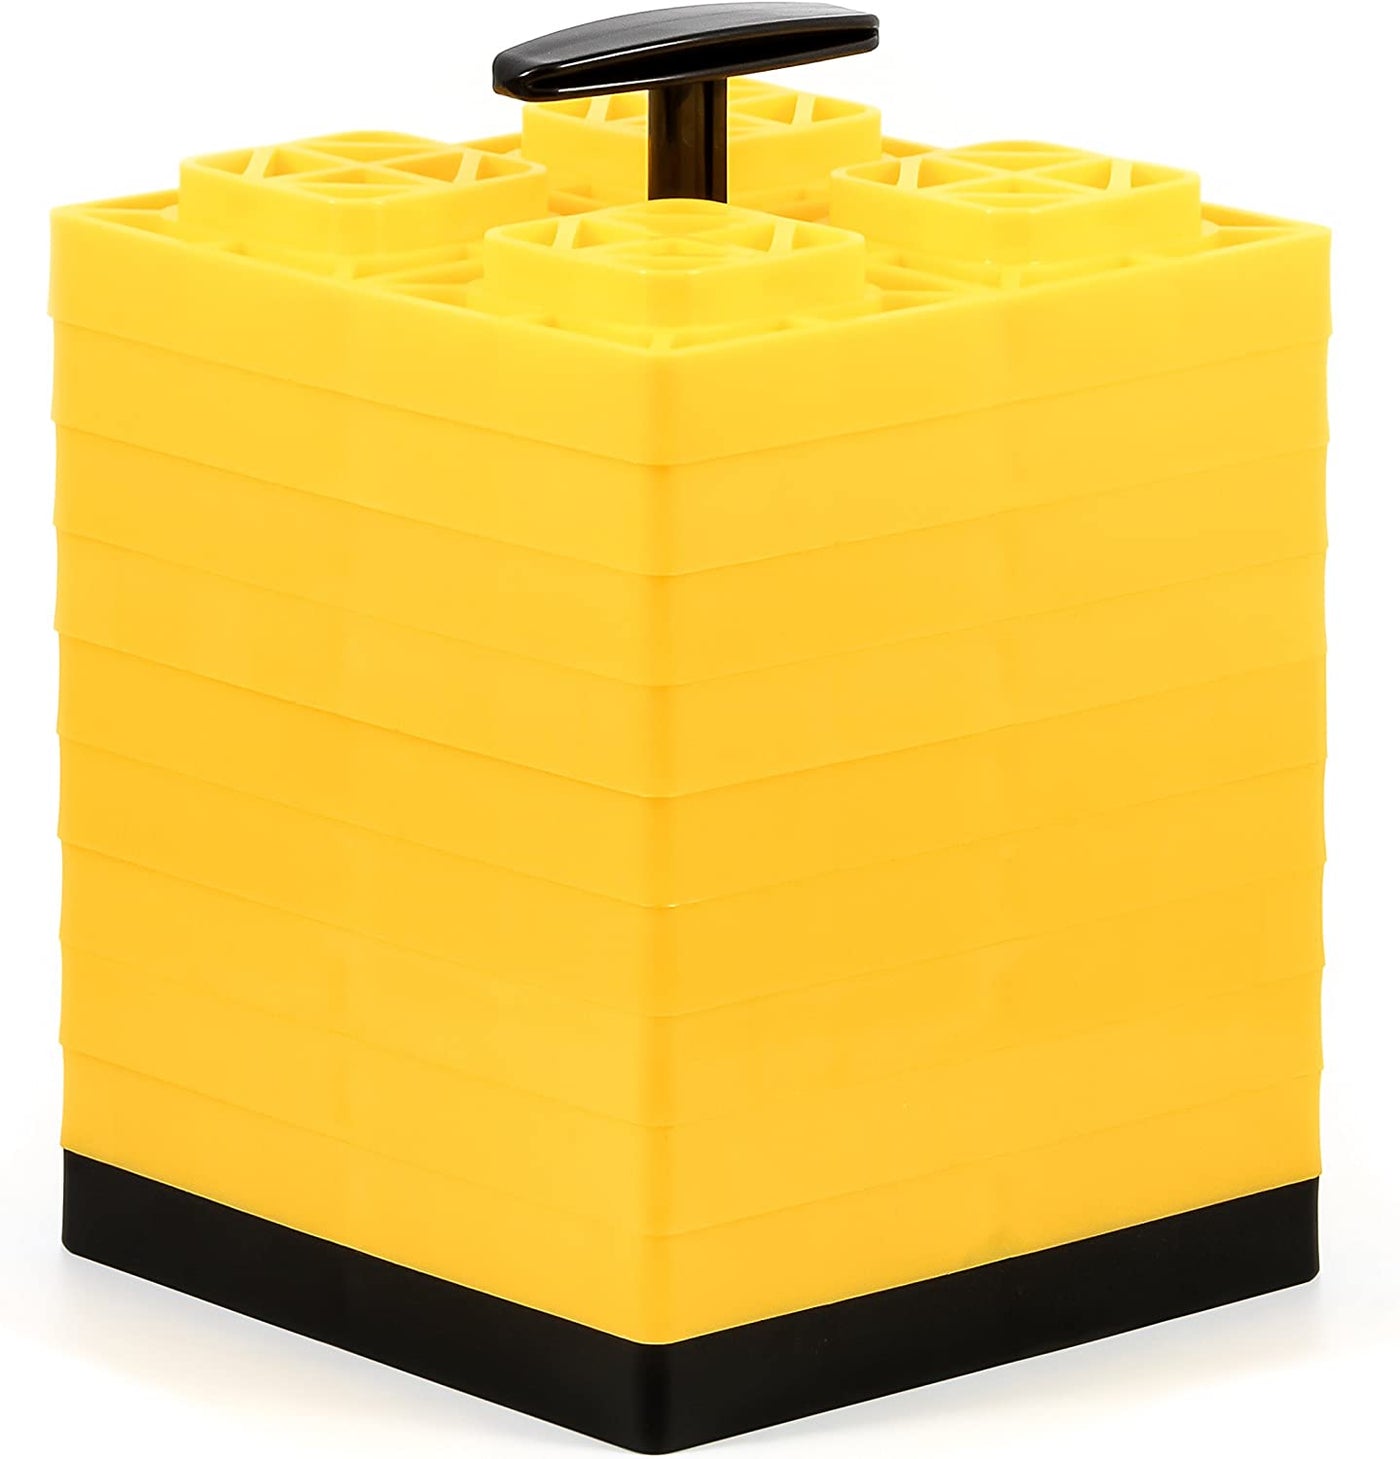 Camco 44512 FasTen Leveling Blocks - w / T-Handle,2x2,Yellow 10 pack Bilingual